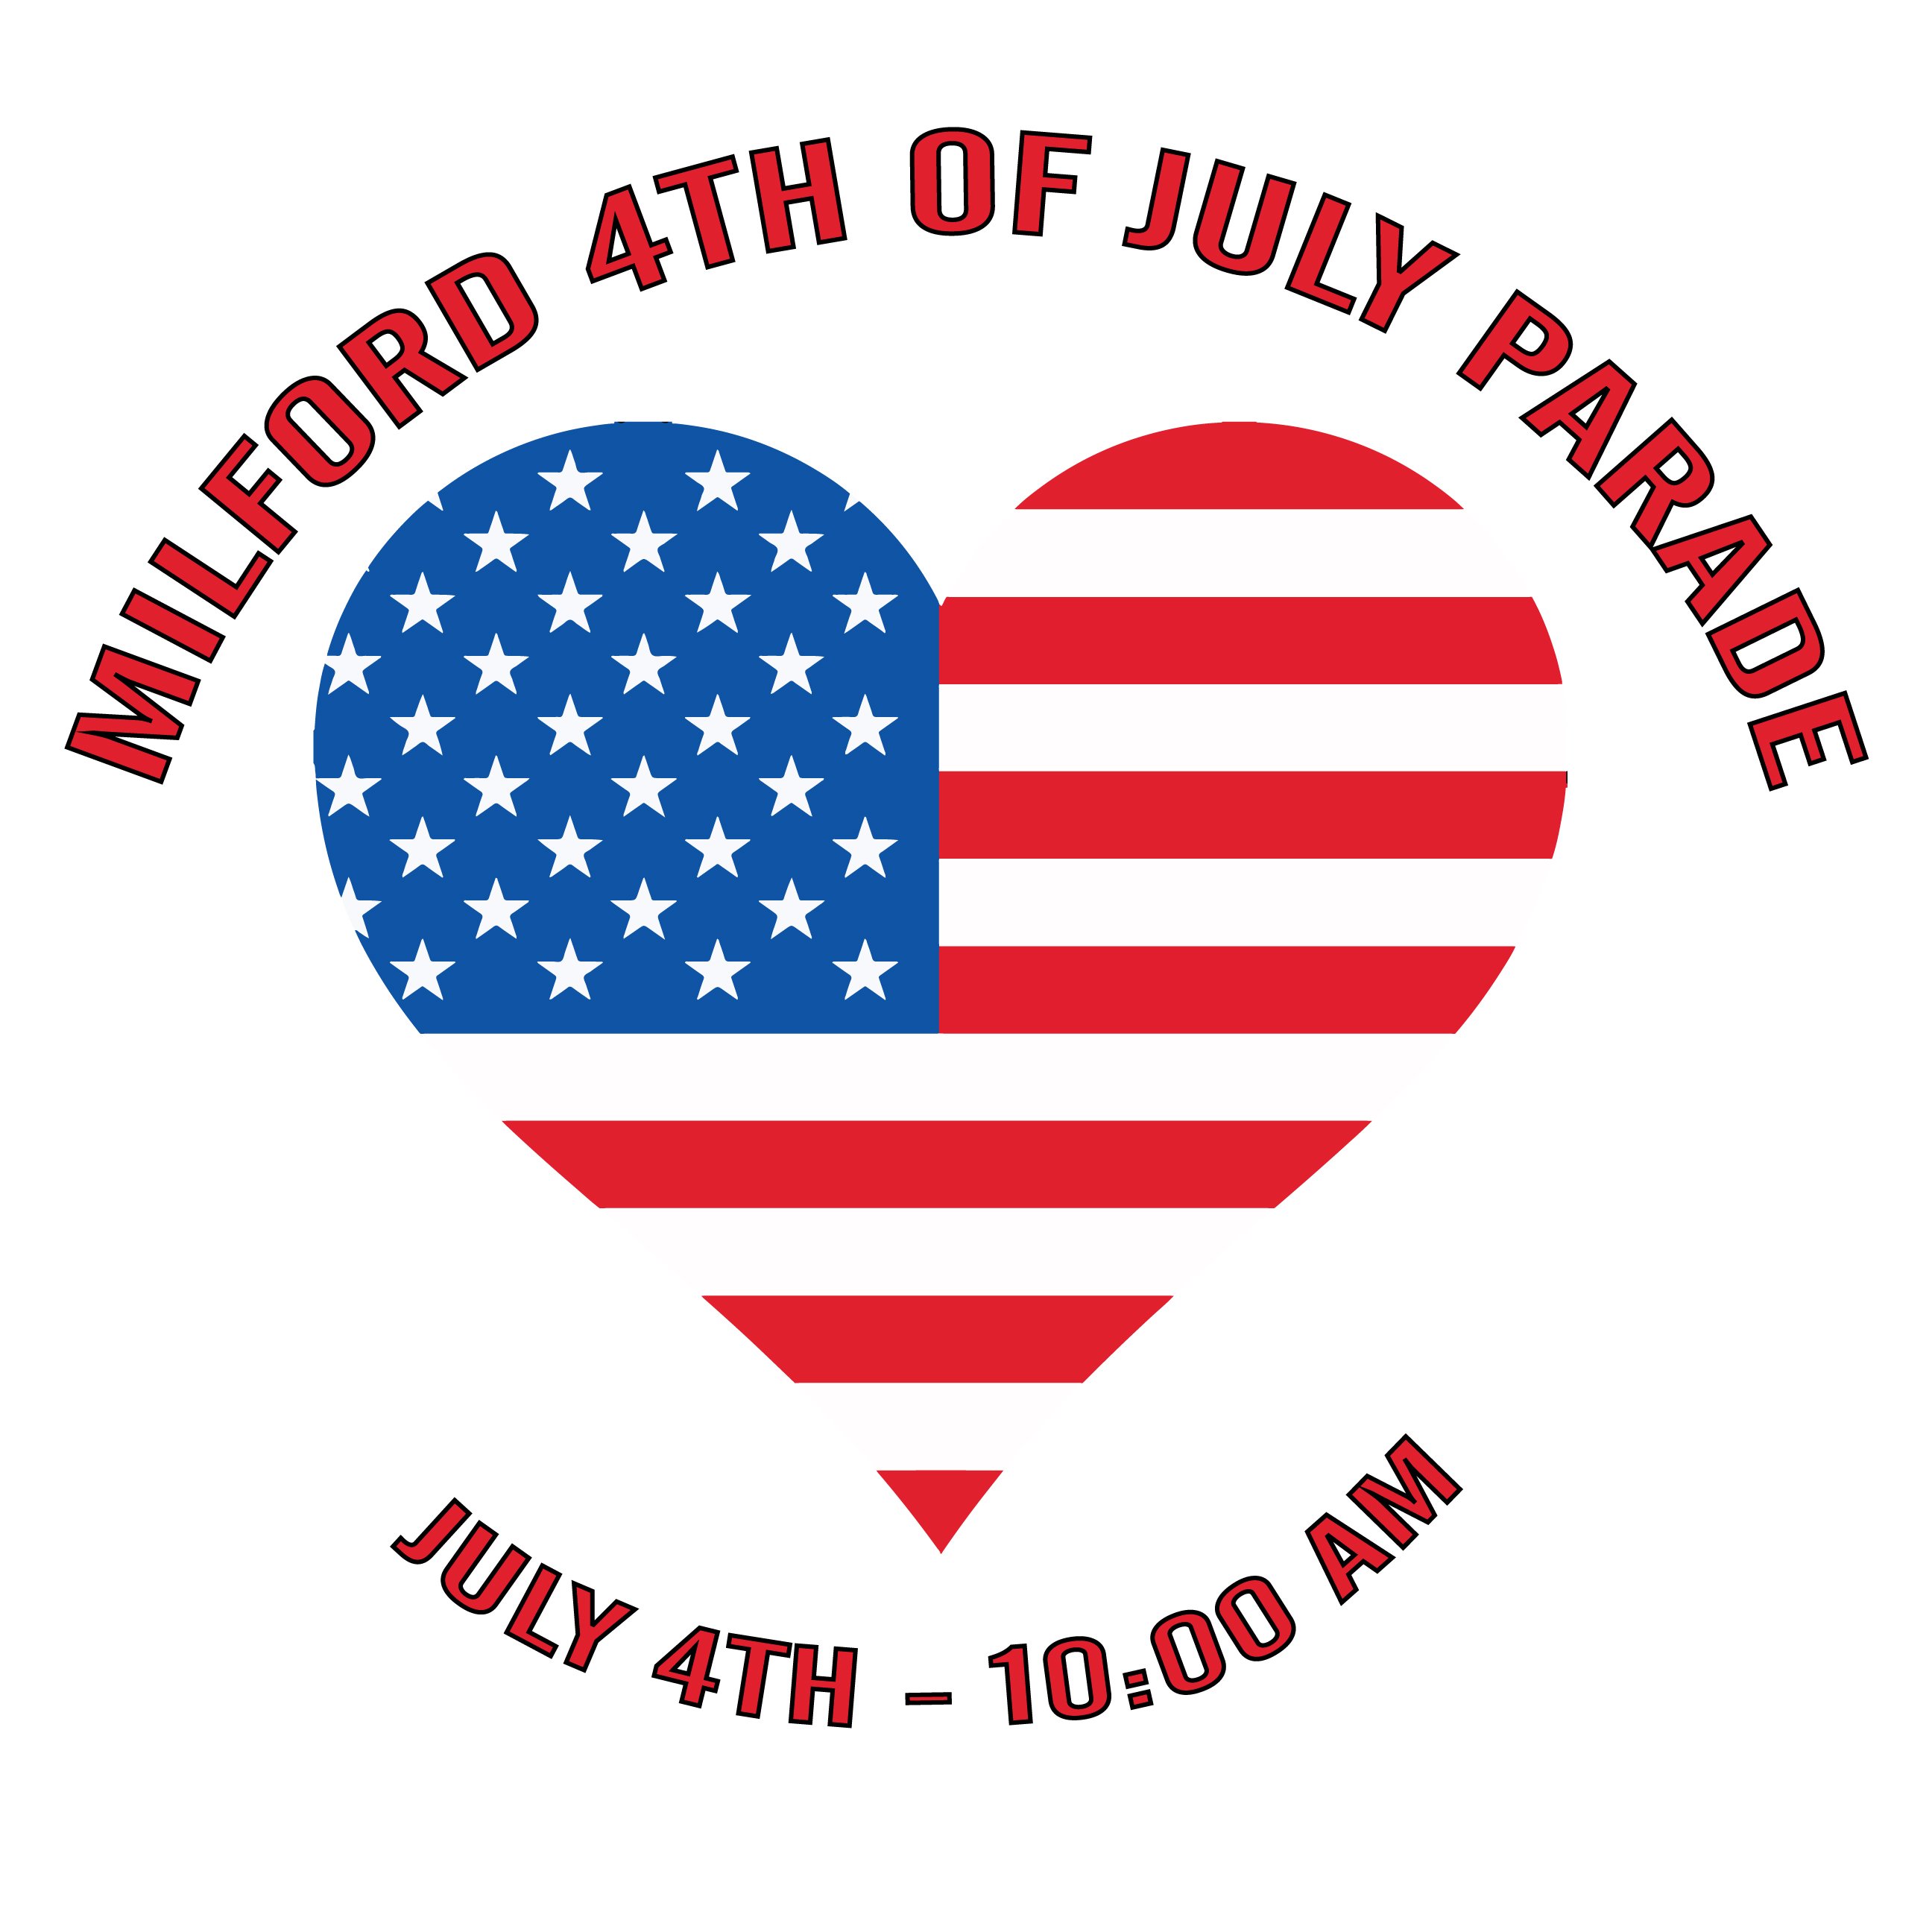 The Annual Milford Fourth of July Parade began in 2018 and celebrates both country and town with a good, old fashion parade up Main Street.